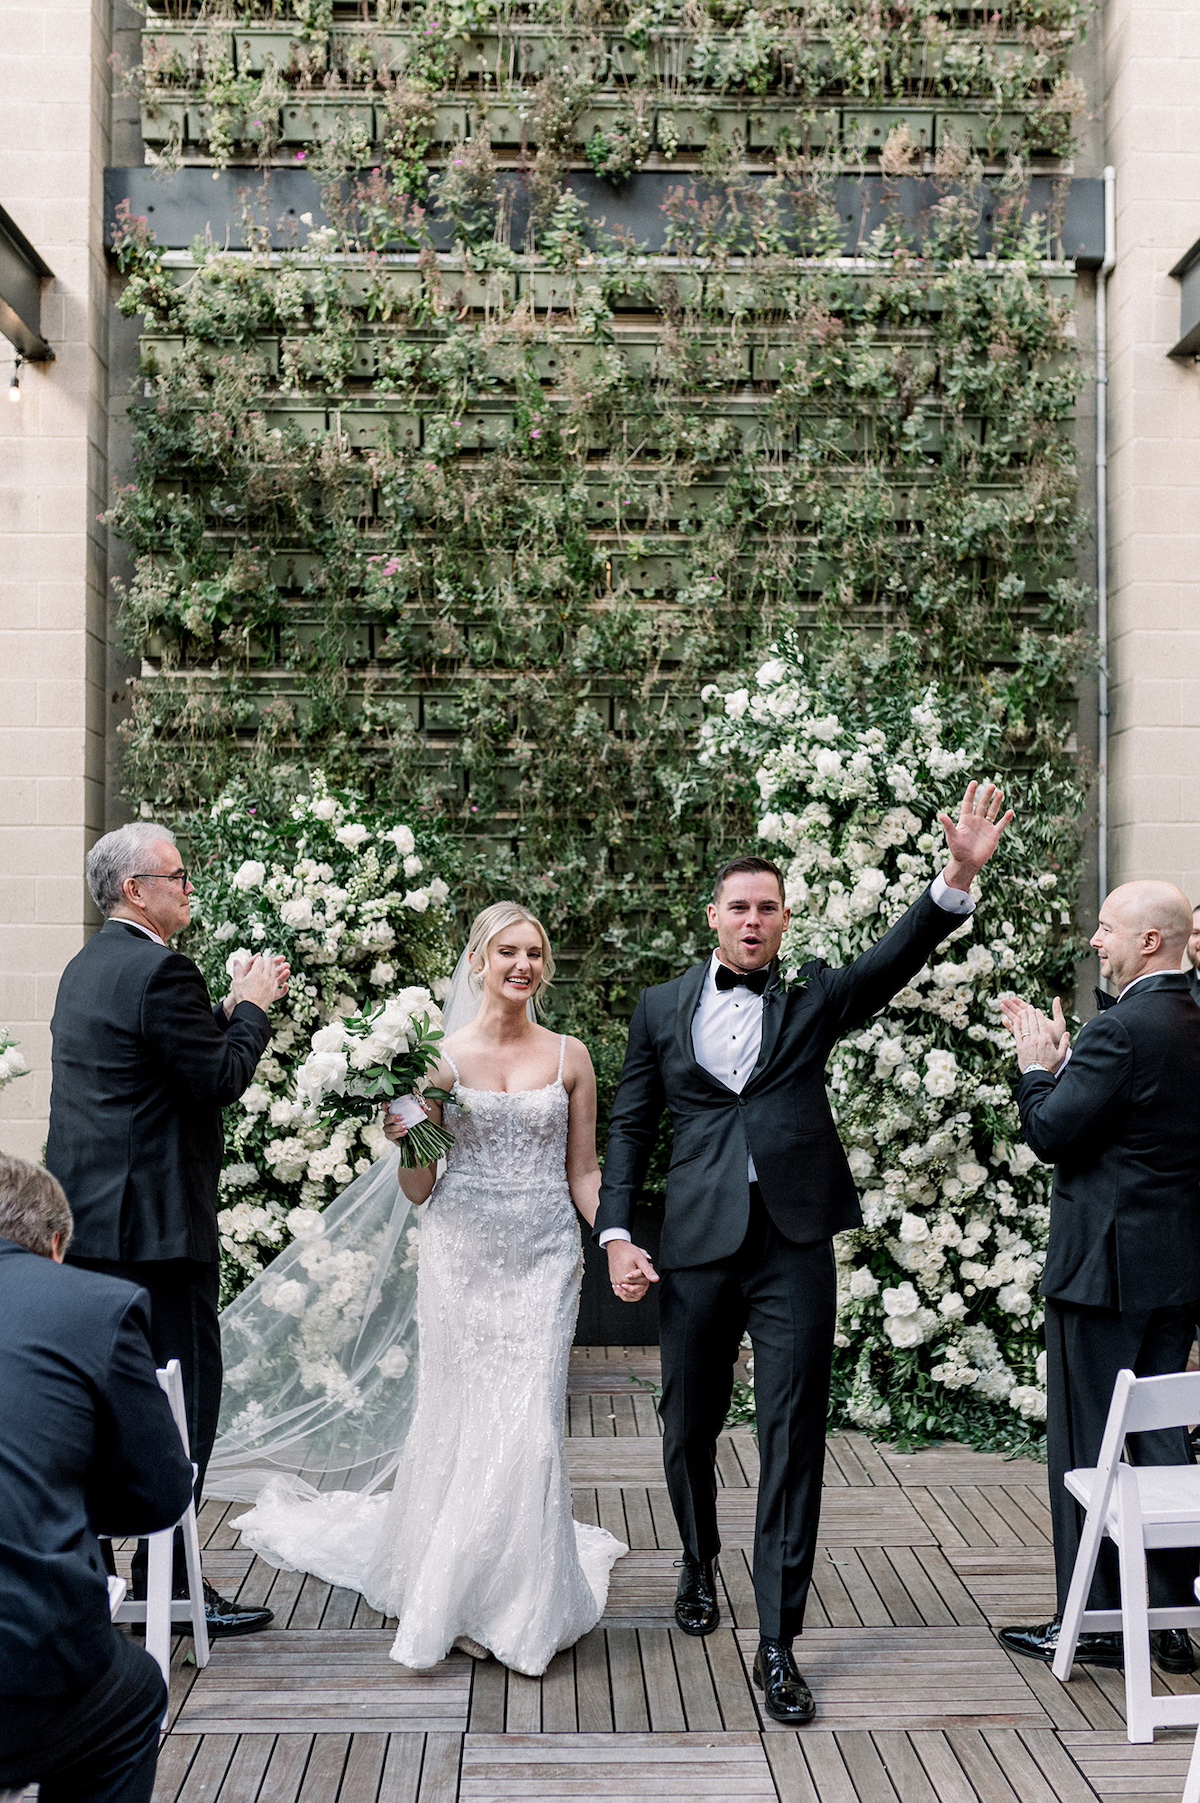 Joyful editorial moment during the recessional, celebrating the conclusion of the ceremony against the scenic allure of Excelsior Lancaster City.